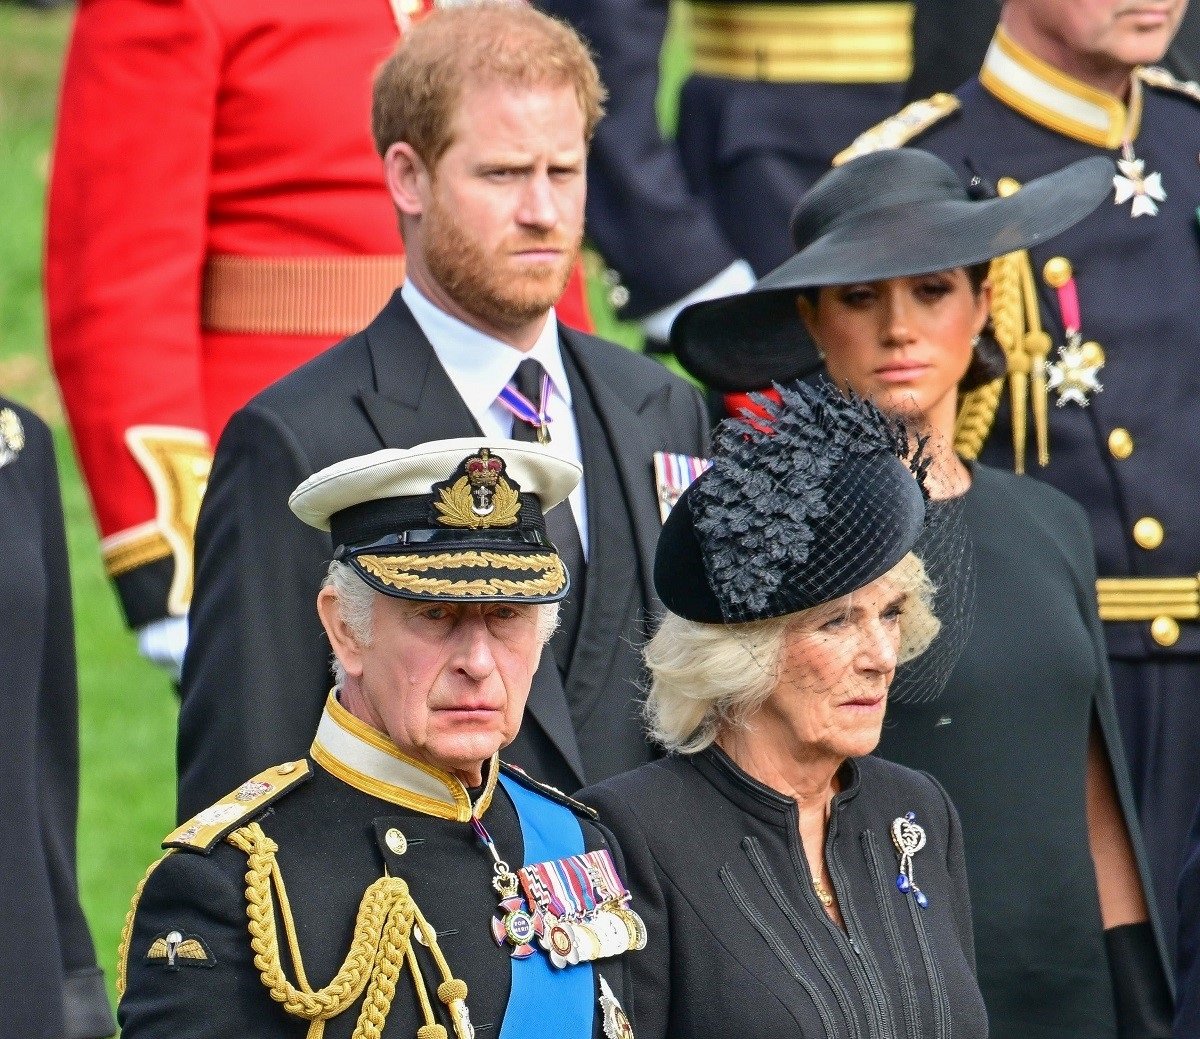 Camilla Parker Bowles Spit Into Her Tea Over Prince Harry’s Suggestion of How They Should Heal Rift, Royal Author Claims